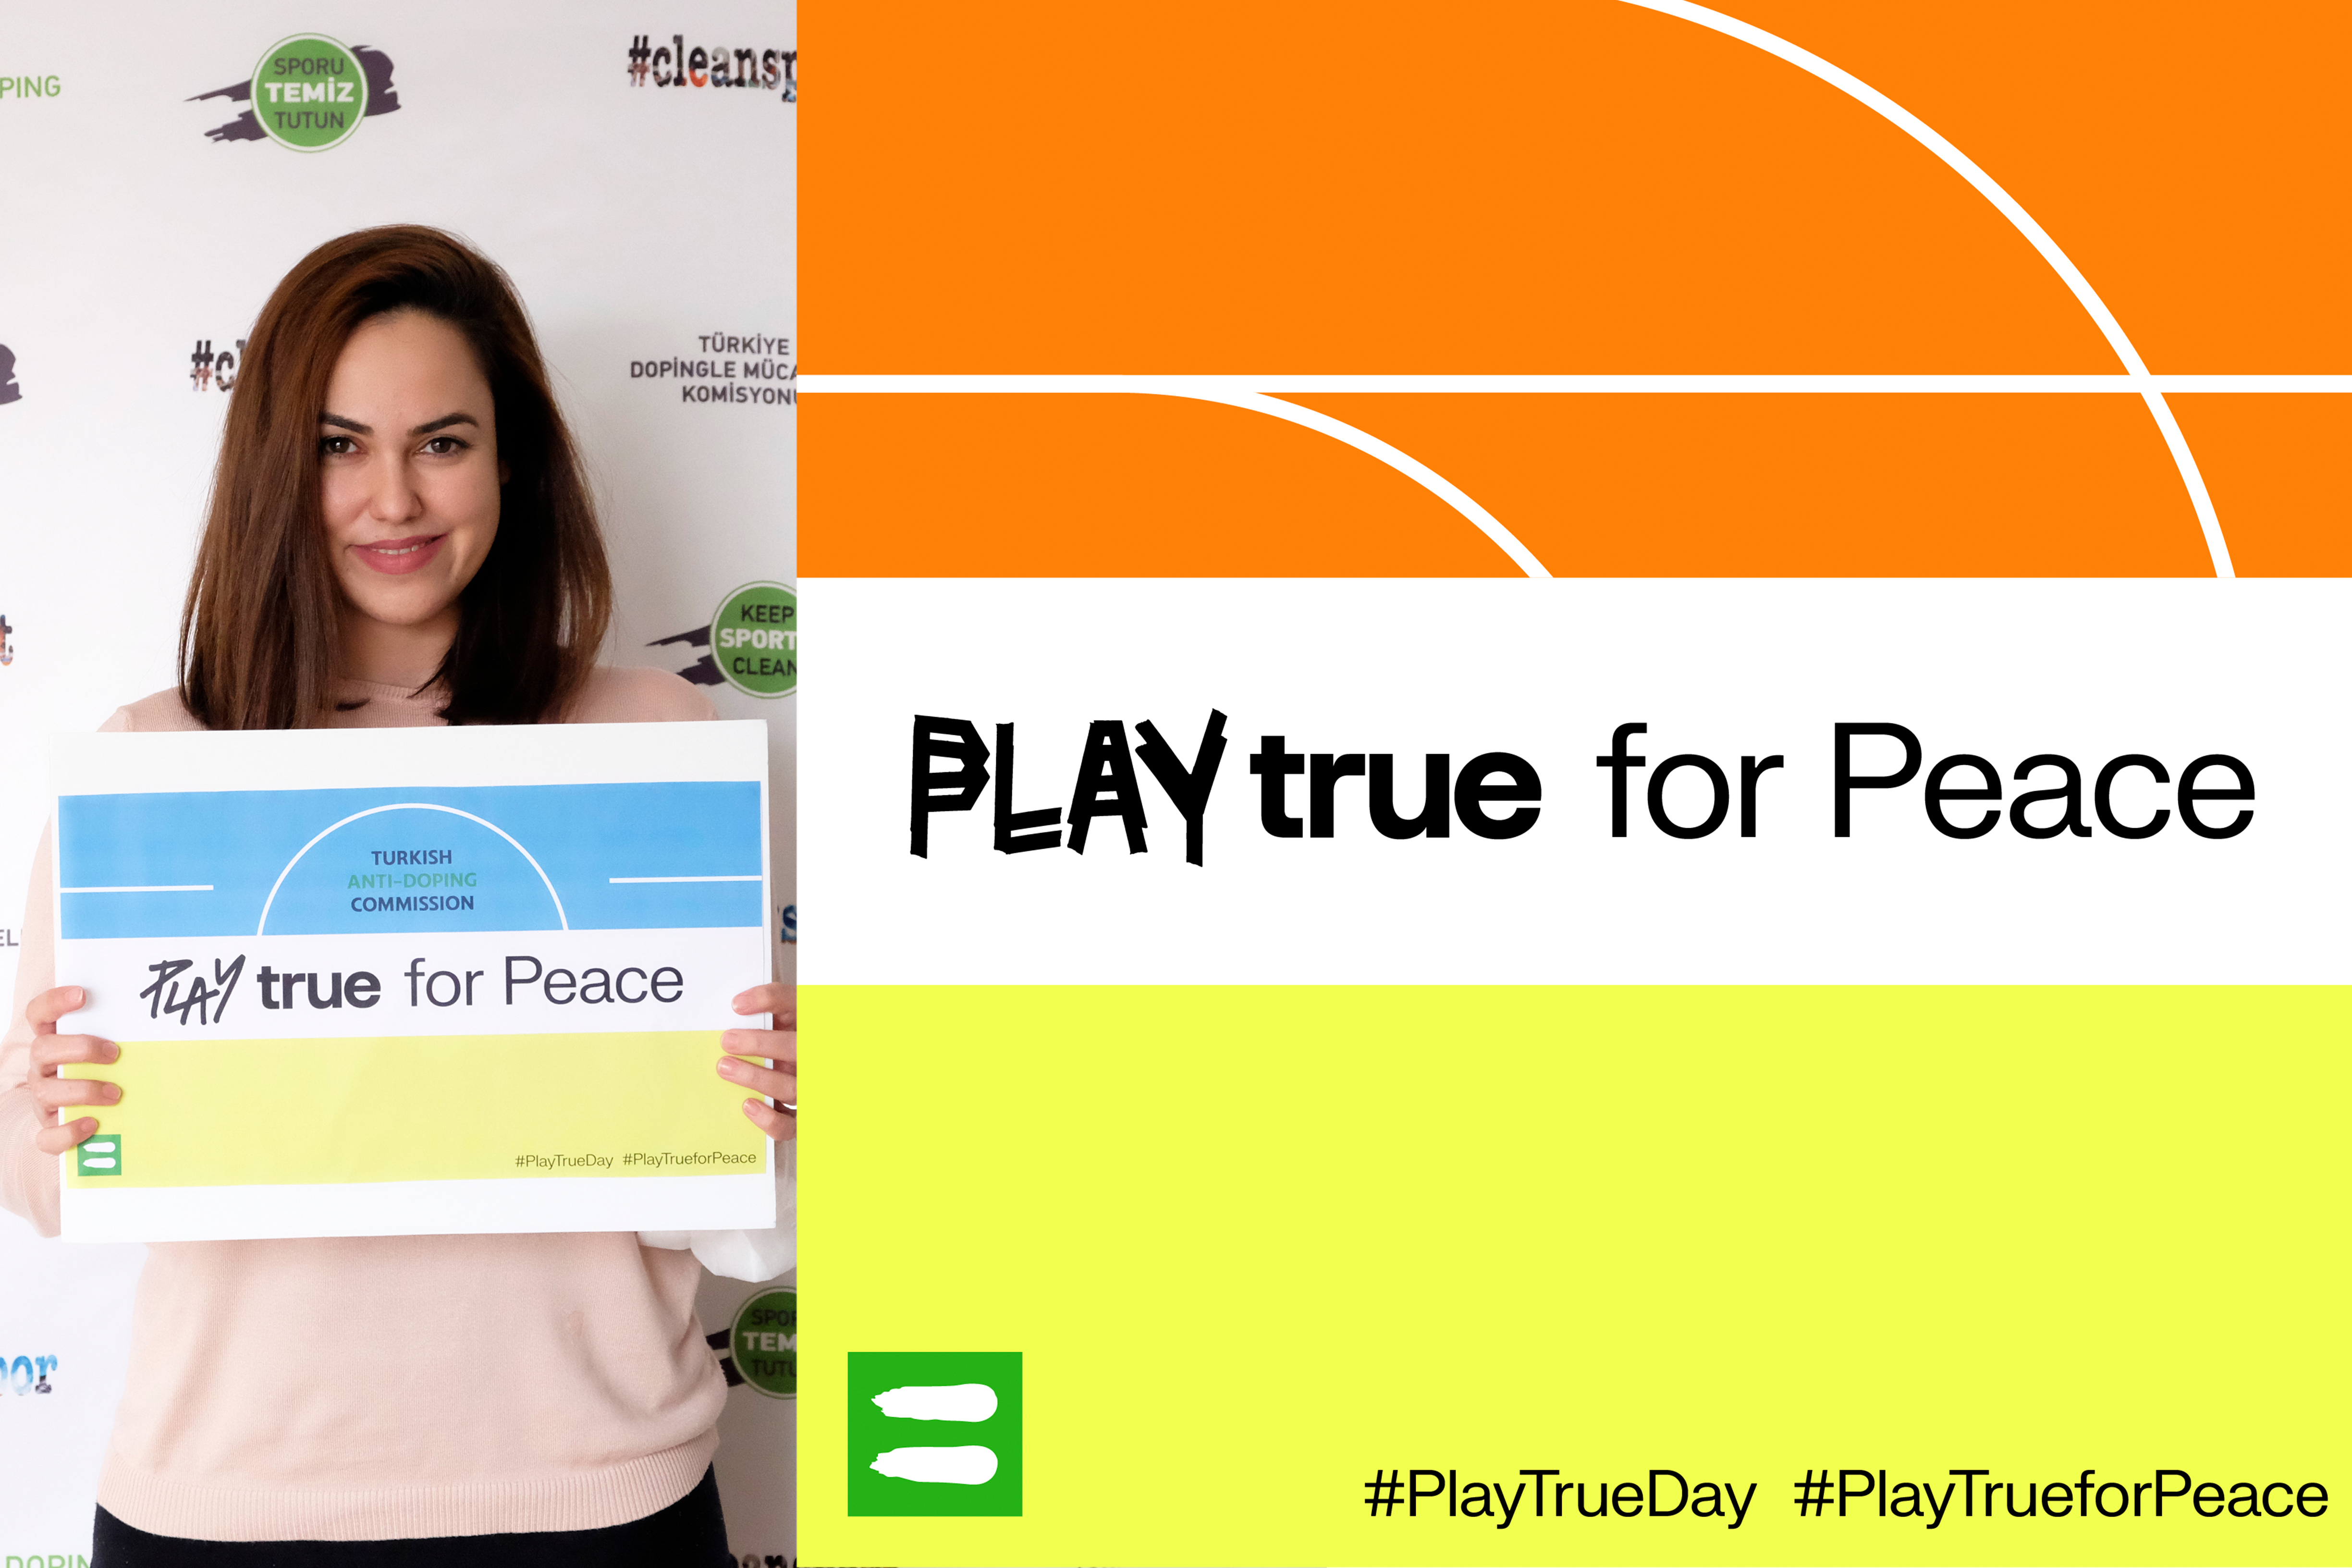 8 APRIL PLAY TRUE FOR PEACE